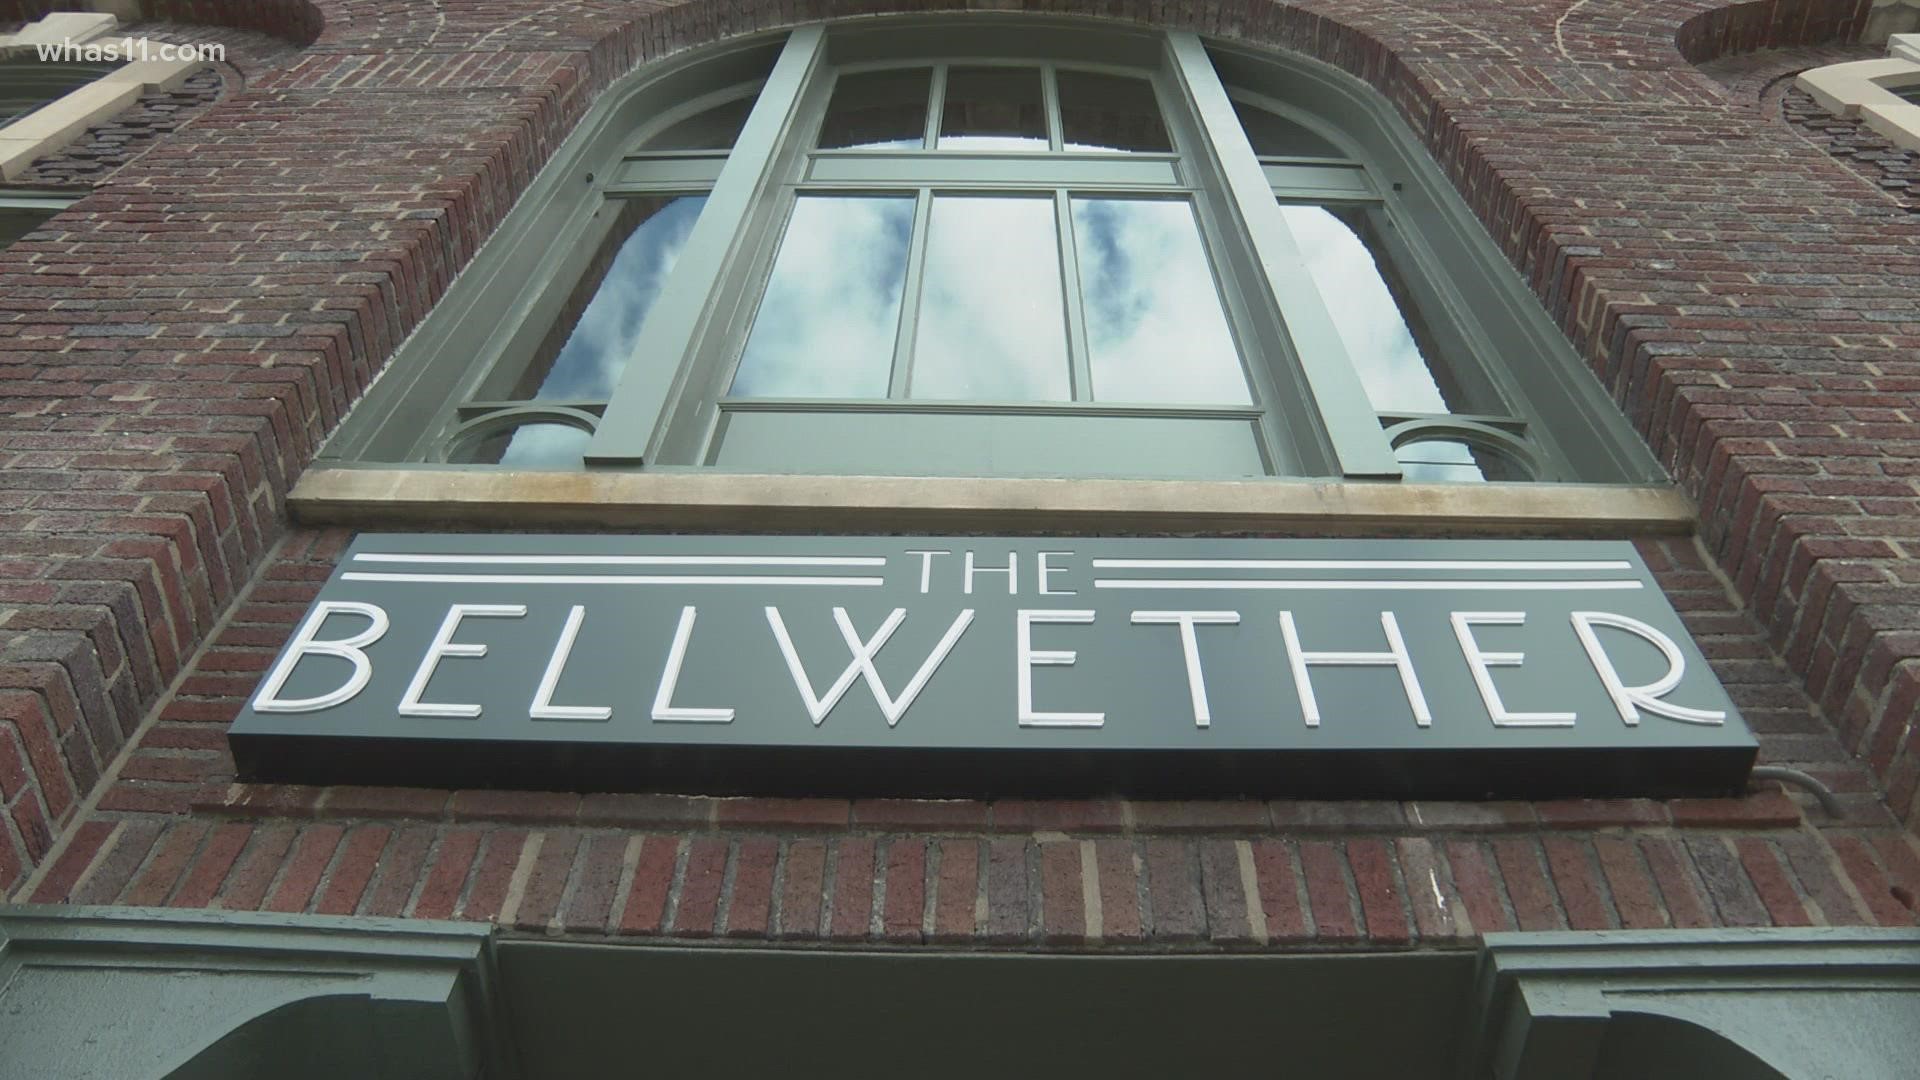 The Bellwether Hotel, located at 1300 Bardstown Road, fills the space of the former Highlands